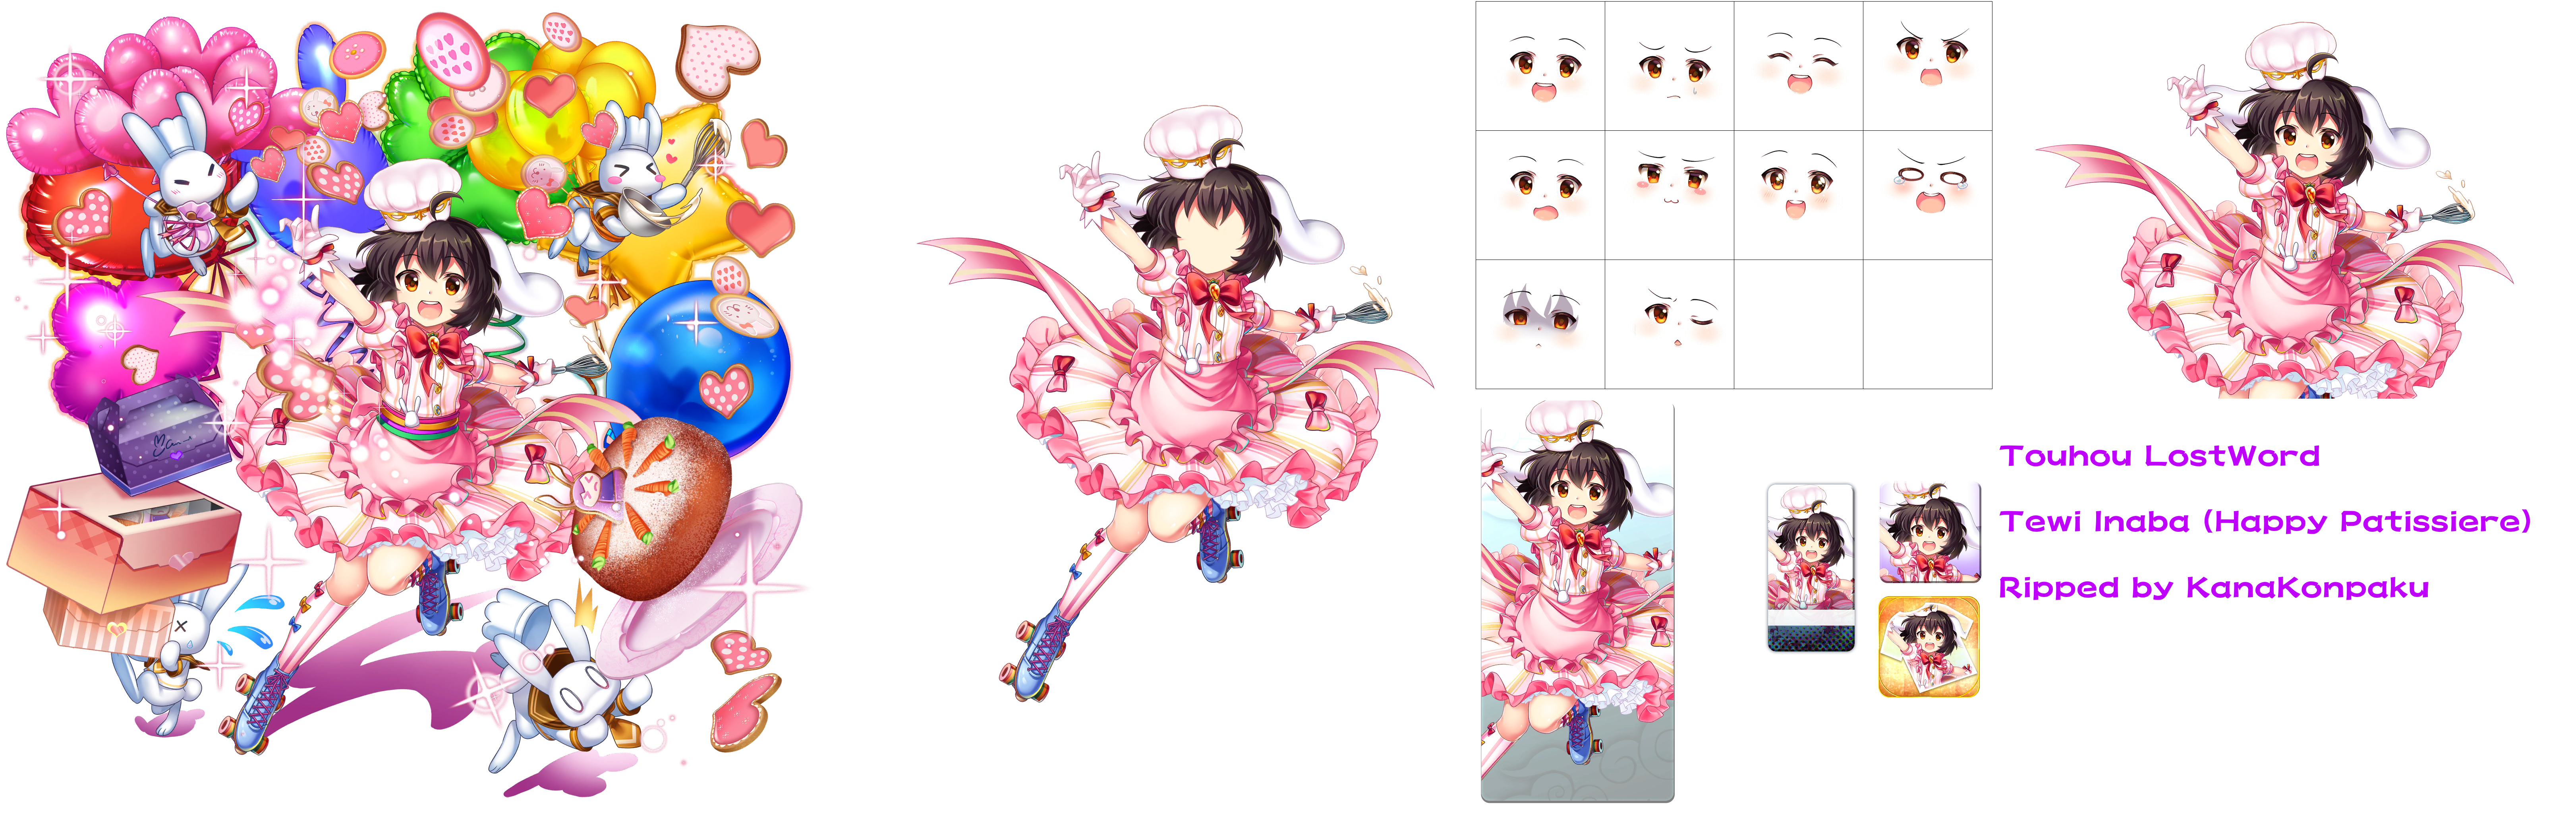 Tewi Inaba (Happy Patissiere)